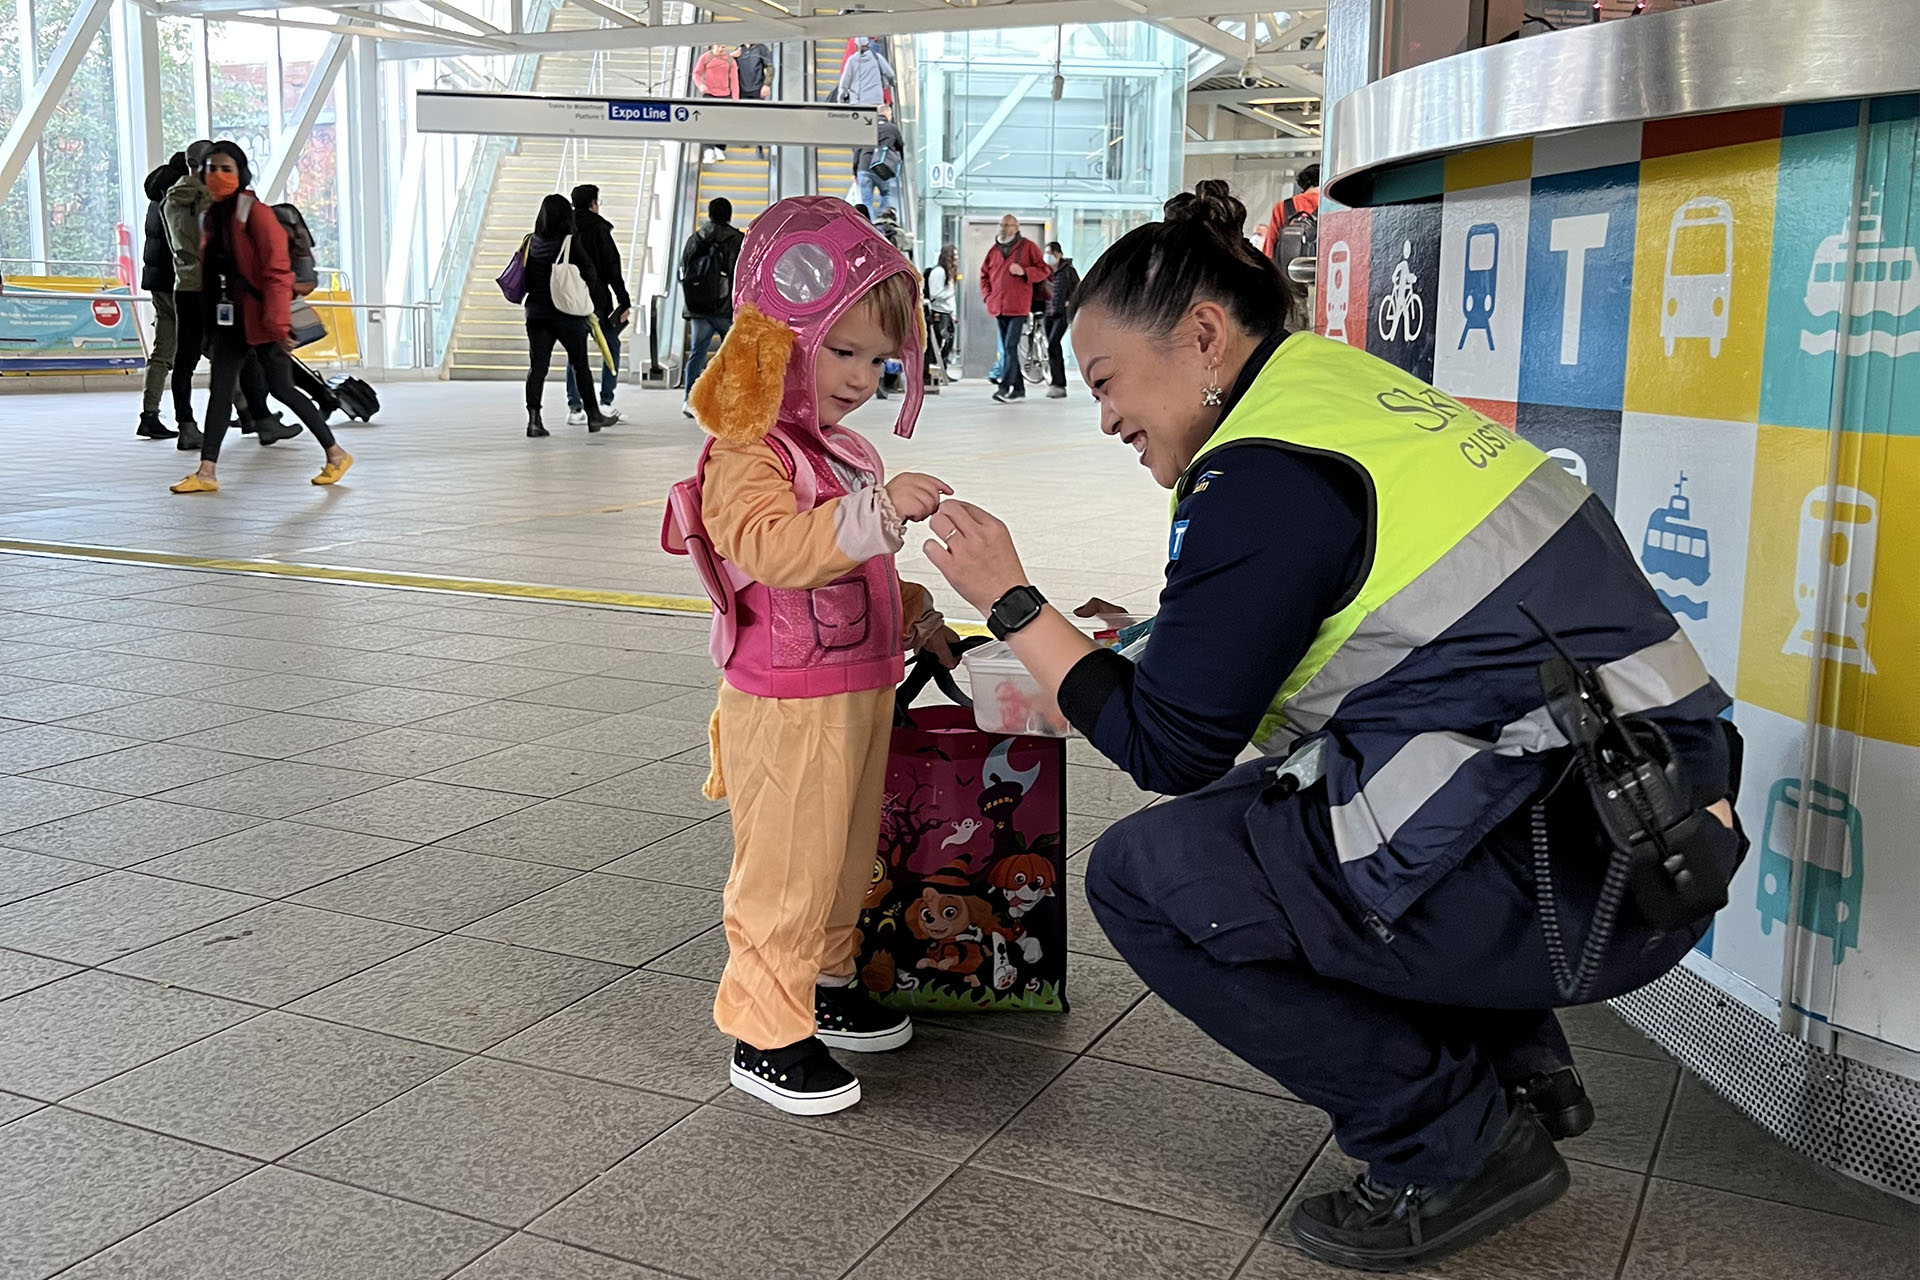 A SkyTrain Attendant, giving candy to a child in costume